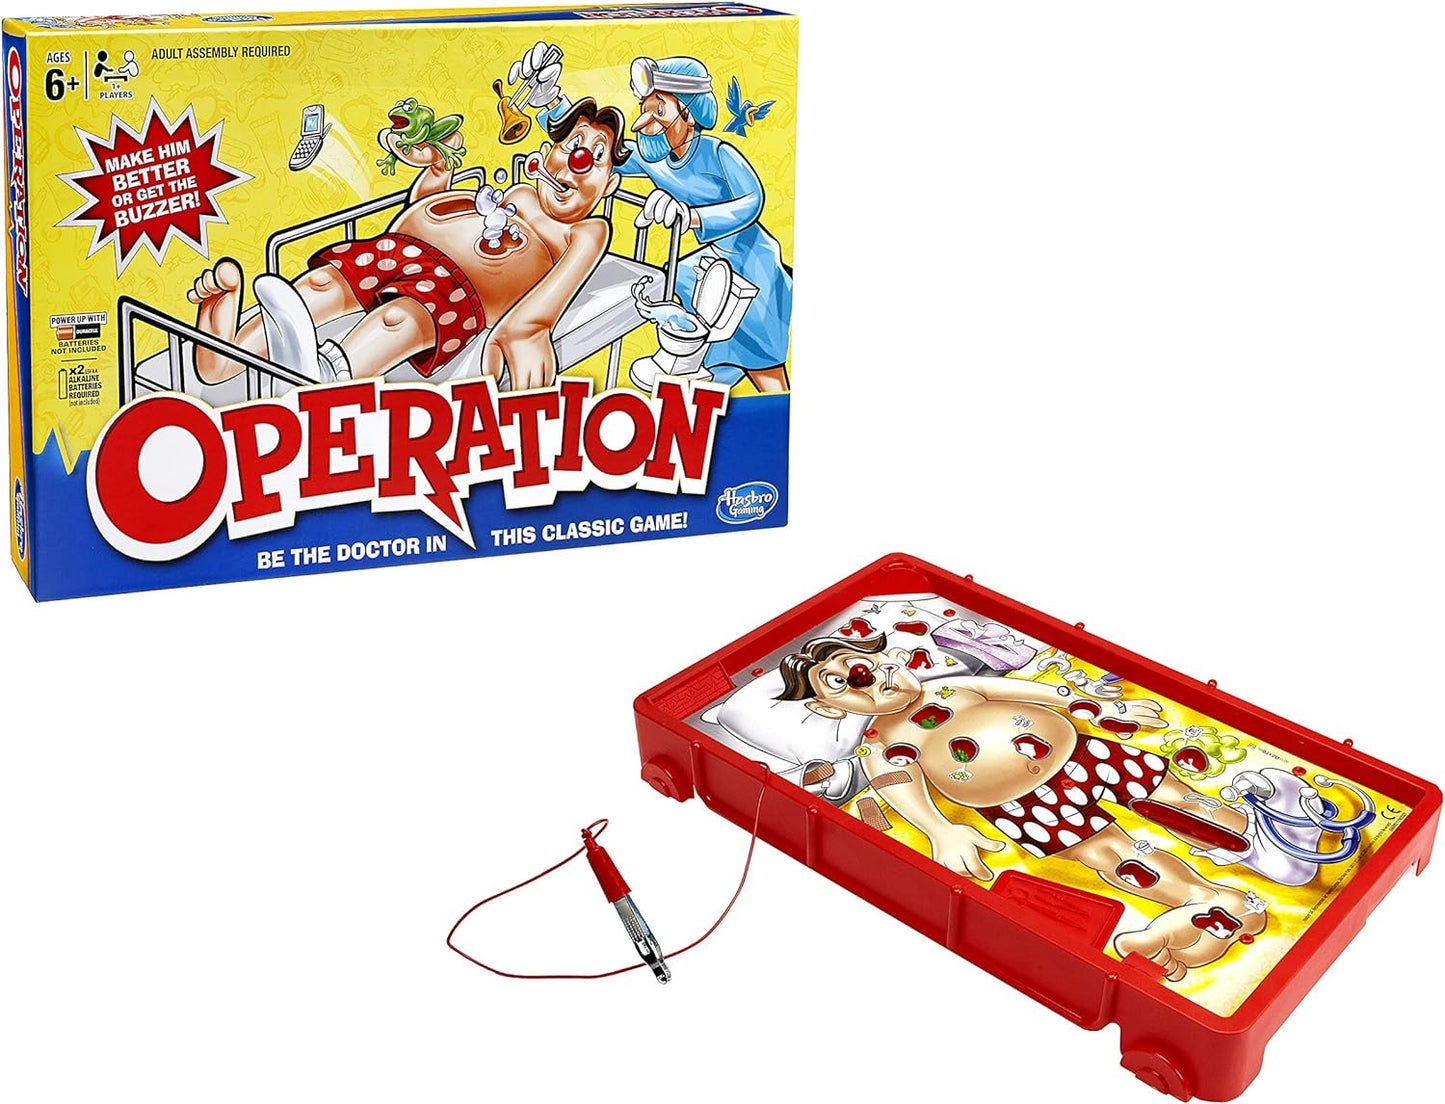 Hasbro Games Classic Operation - French